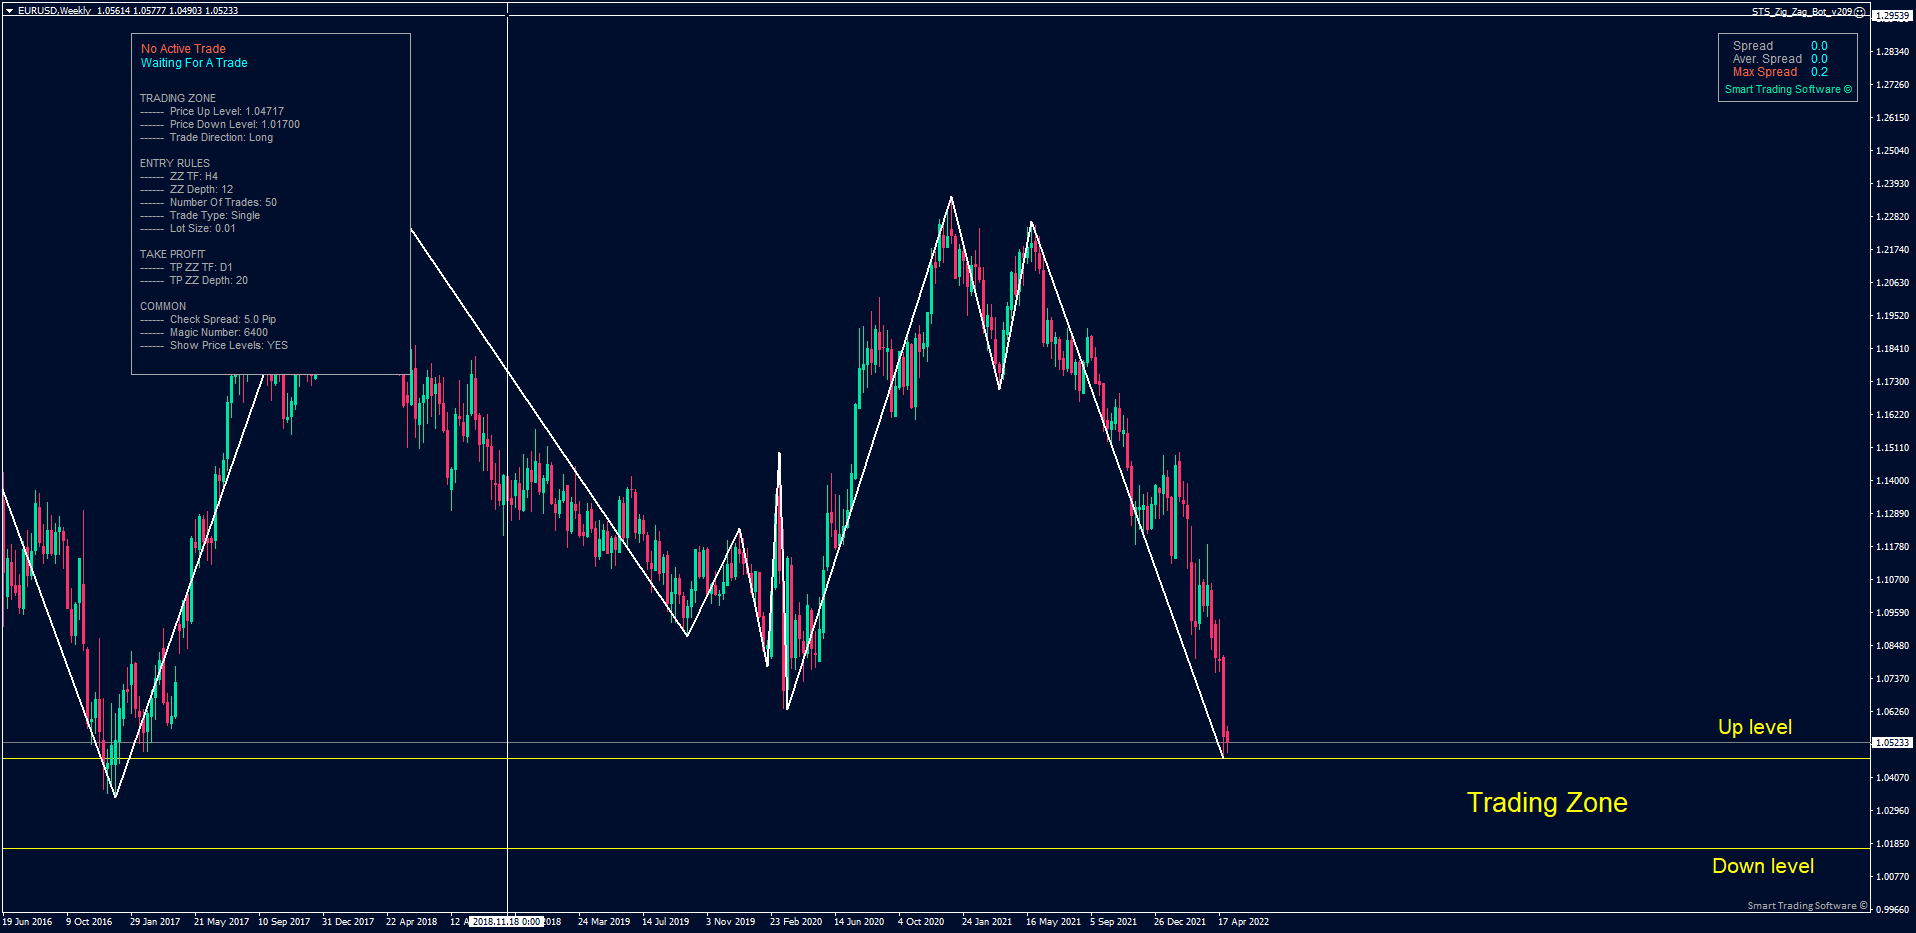 EUR/USD Weekly chart